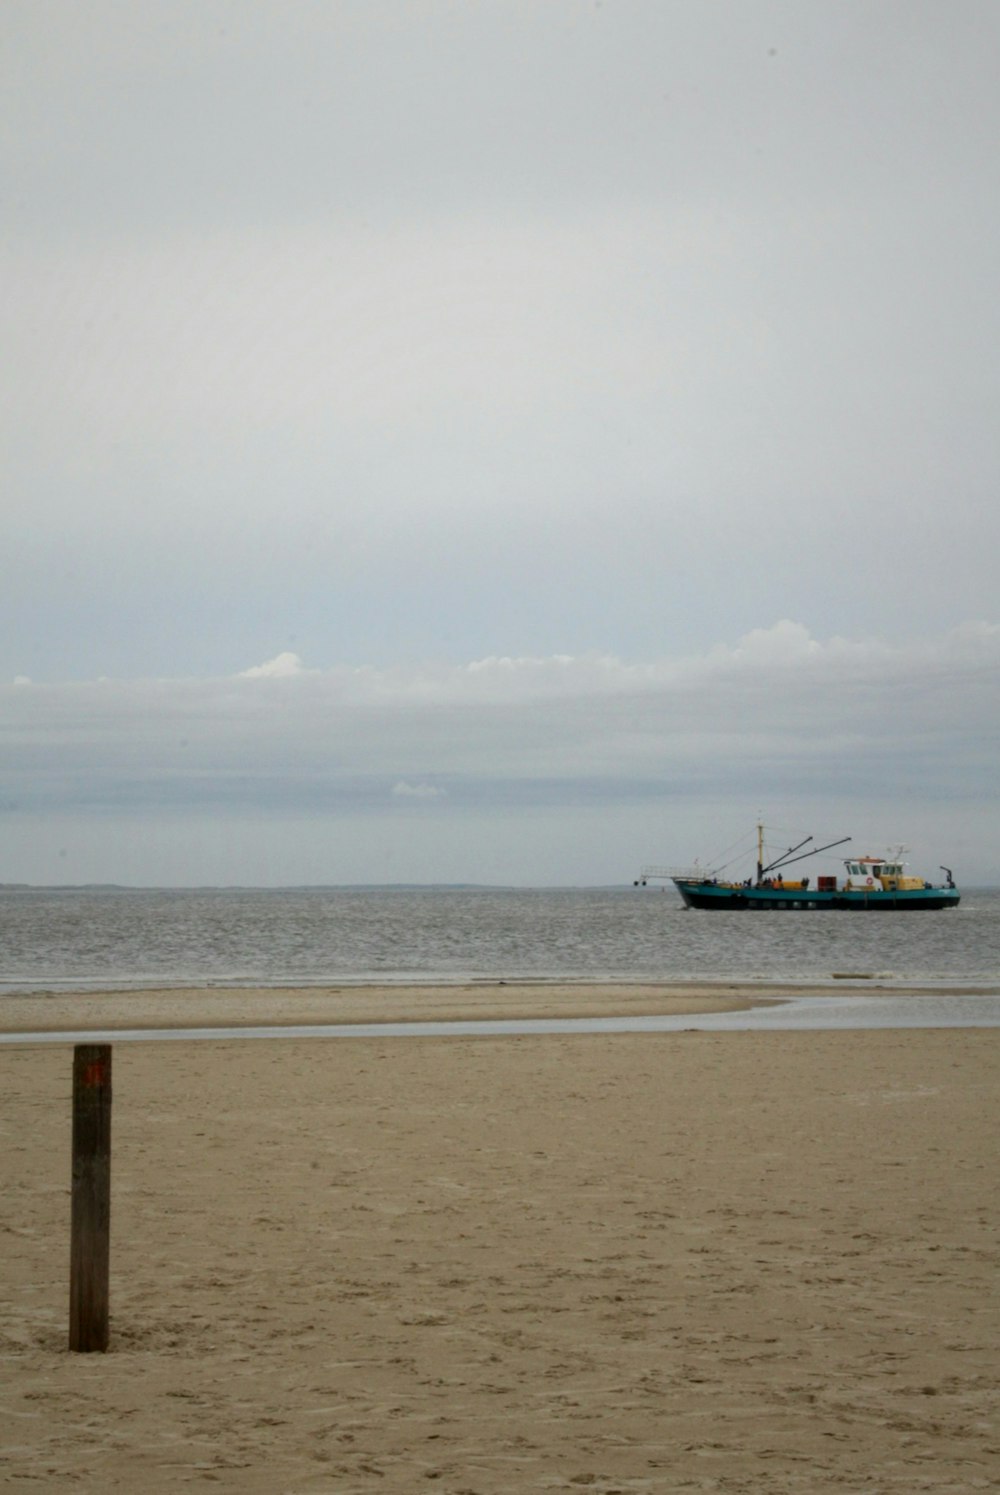 a boat is in the distance on the beach